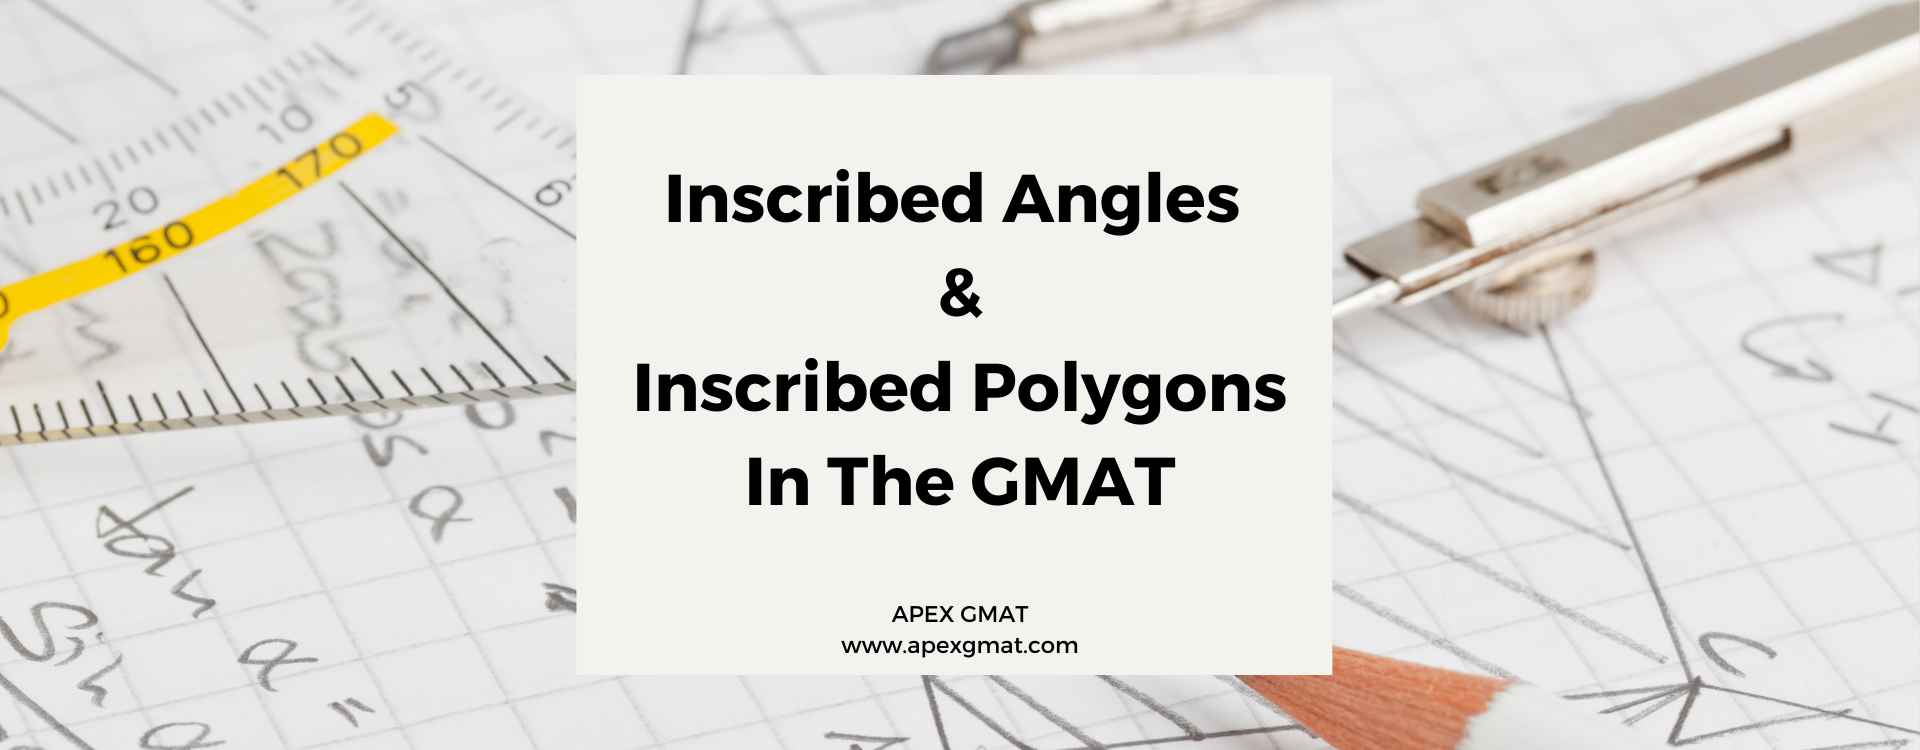 Inscribed Angles & Inscribed Polygons In The GMAT